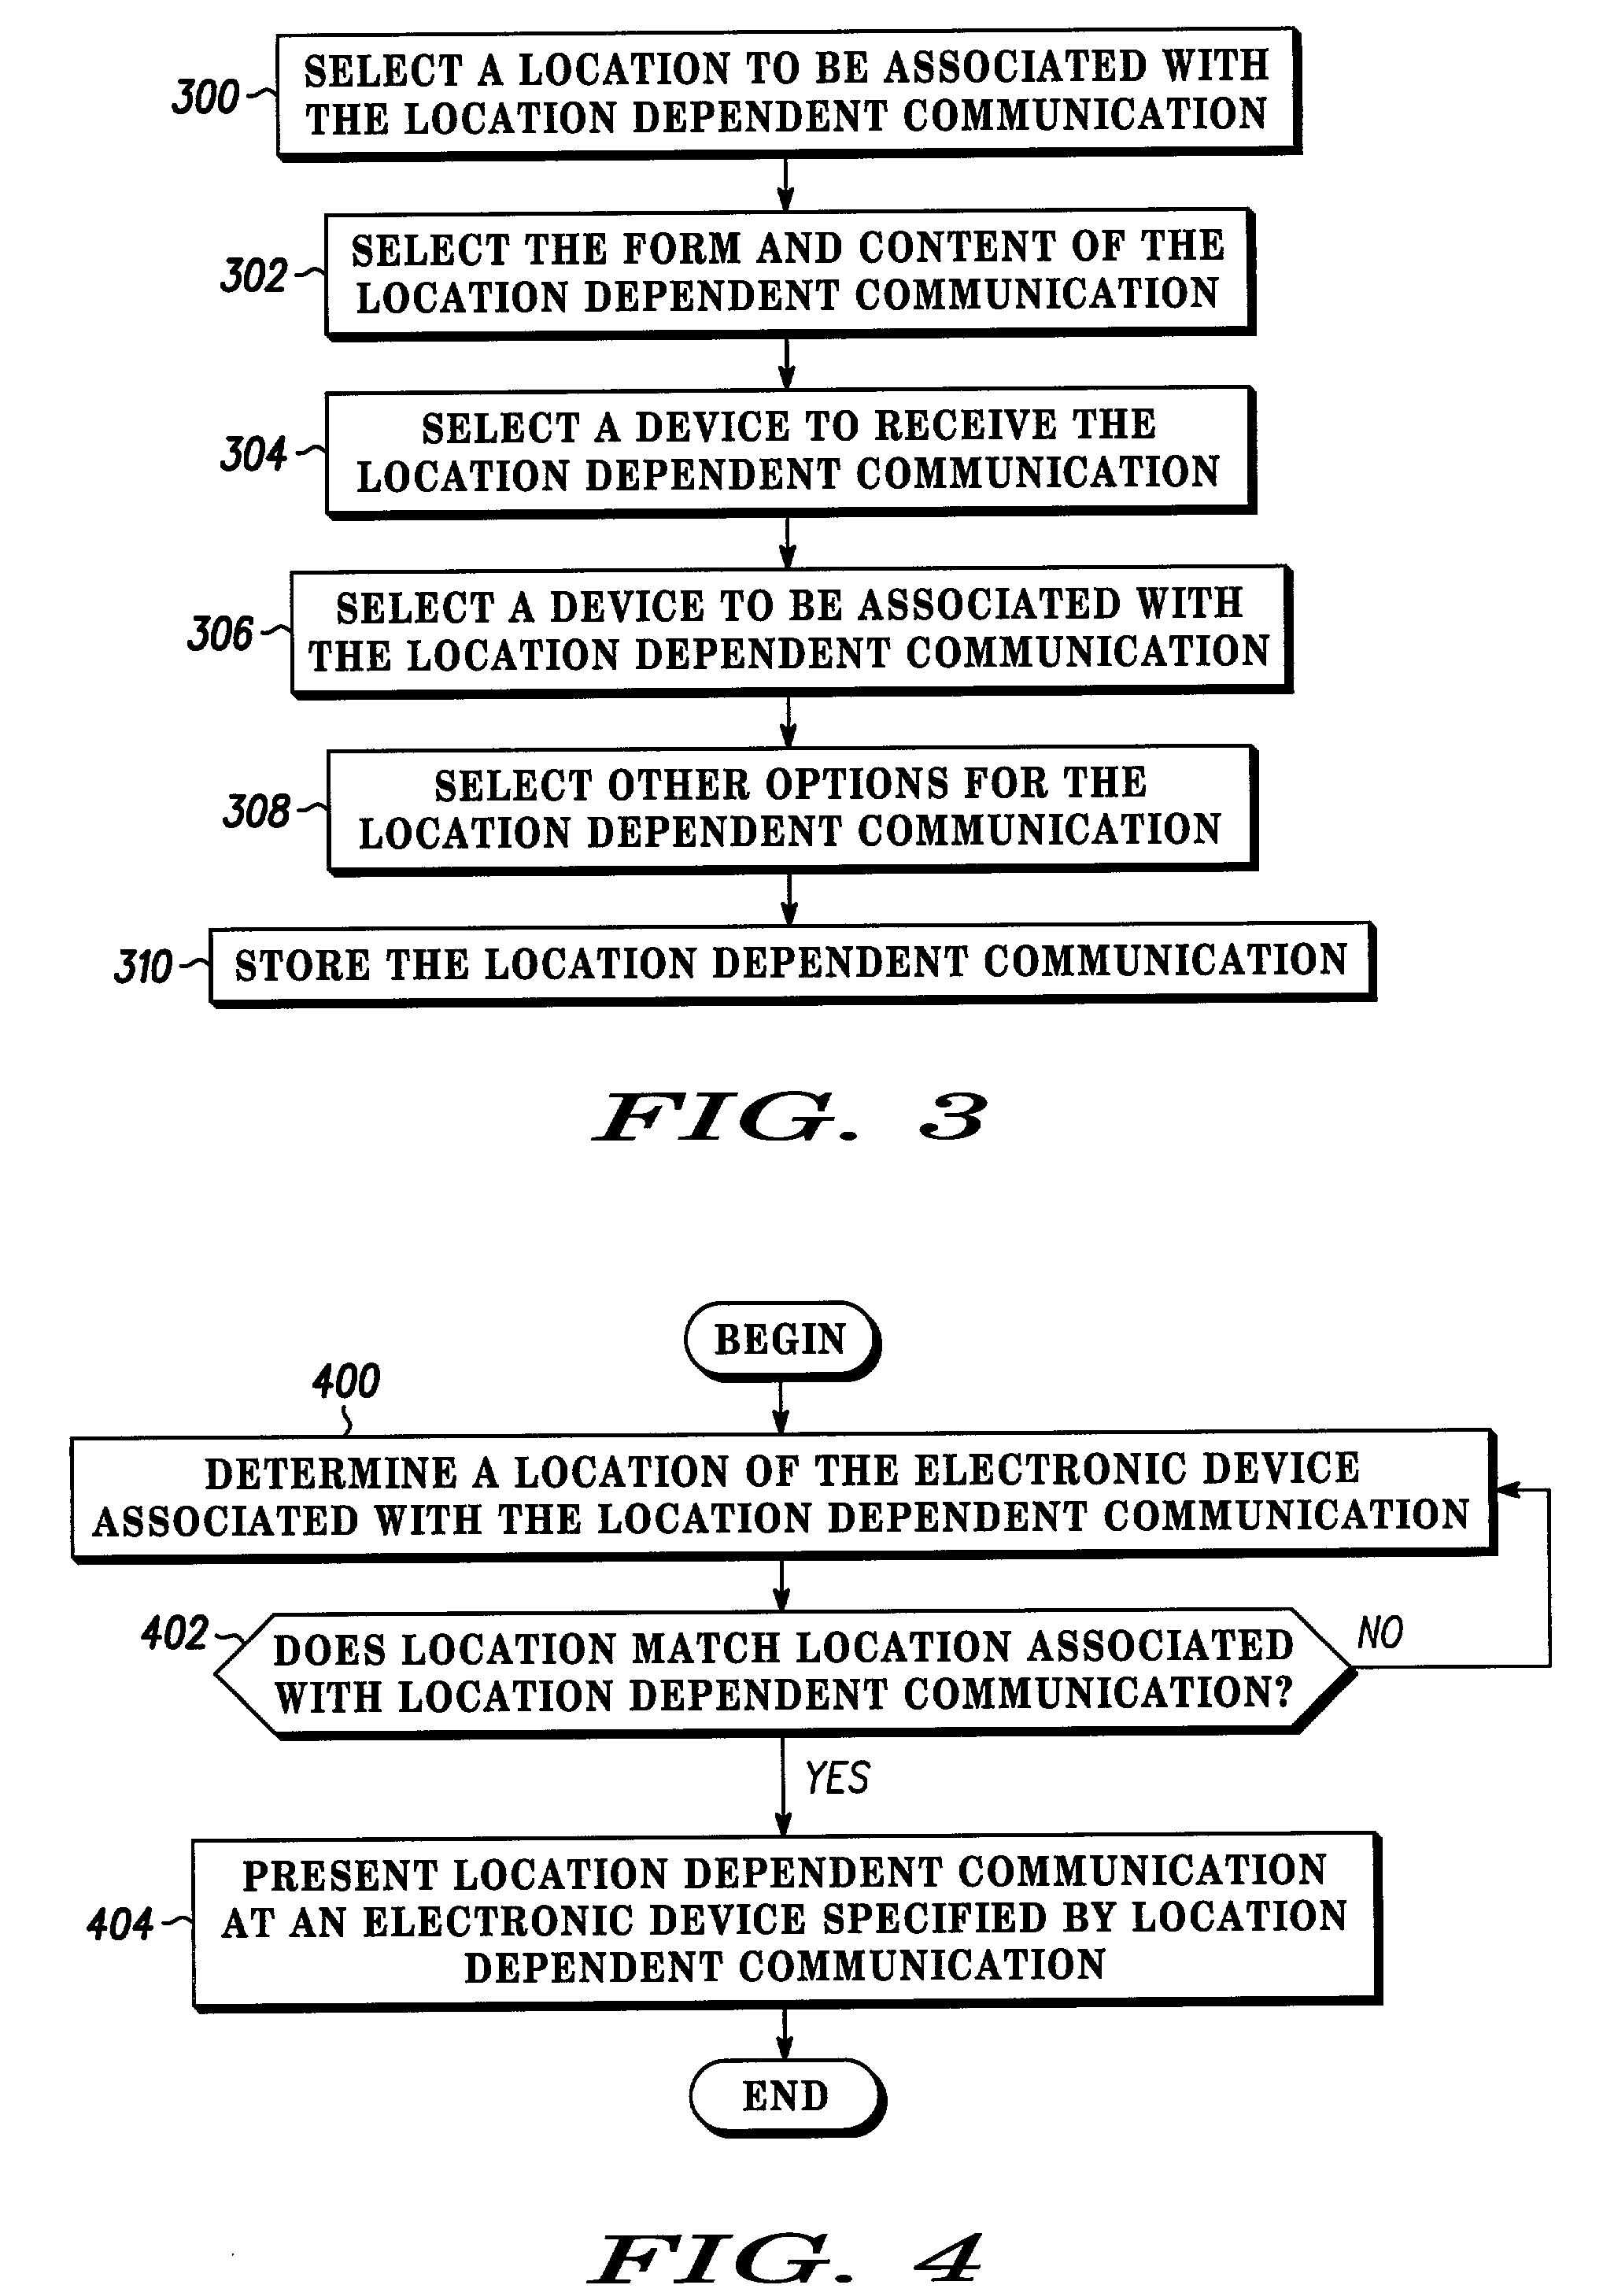 Method and apparatus for creating and presenting a location dependent communication with an electronic device